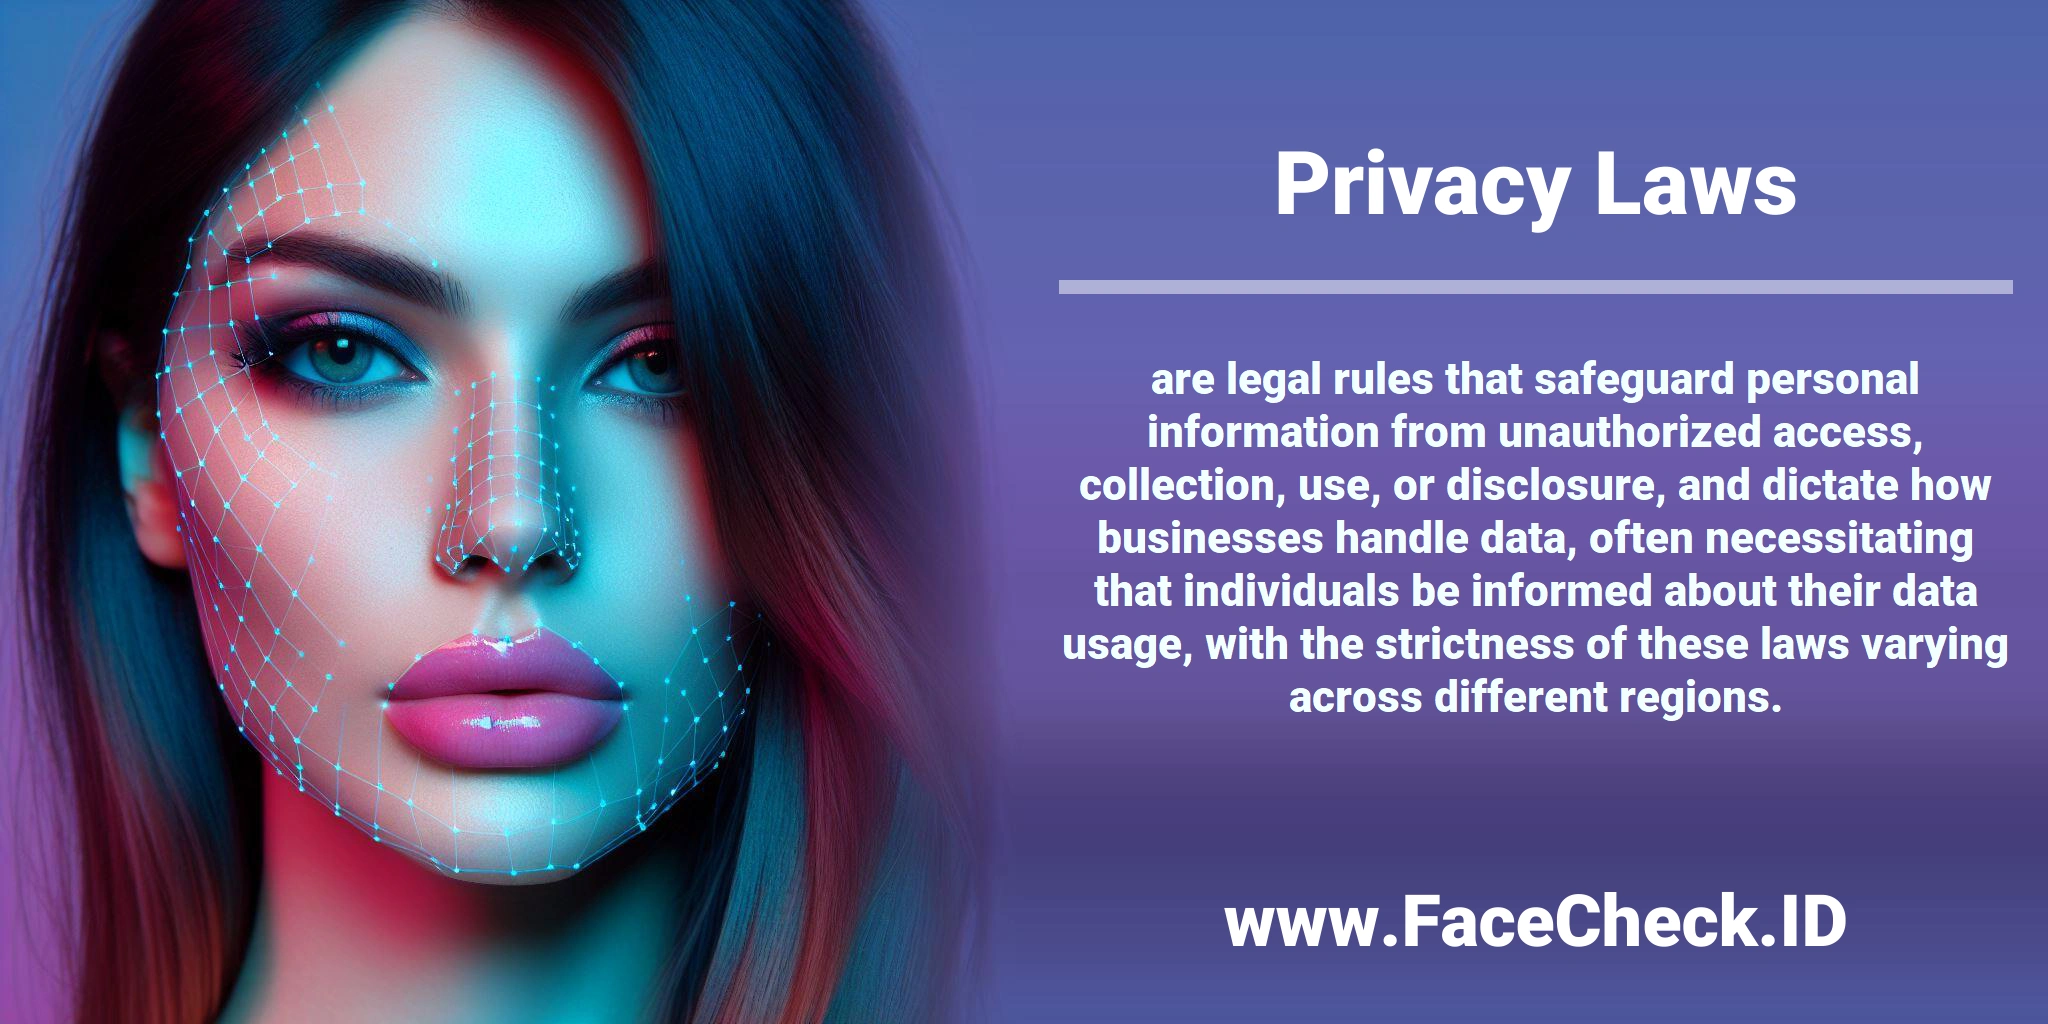 <b>Privacy Laws</b> are legal rules that safeguard personal information from unauthorized access, collection, use, or disclosure, and dictate how businesses handle data, often necessitating that individuals be informed about their data usage, with the strictness of these laws varying across different regions.